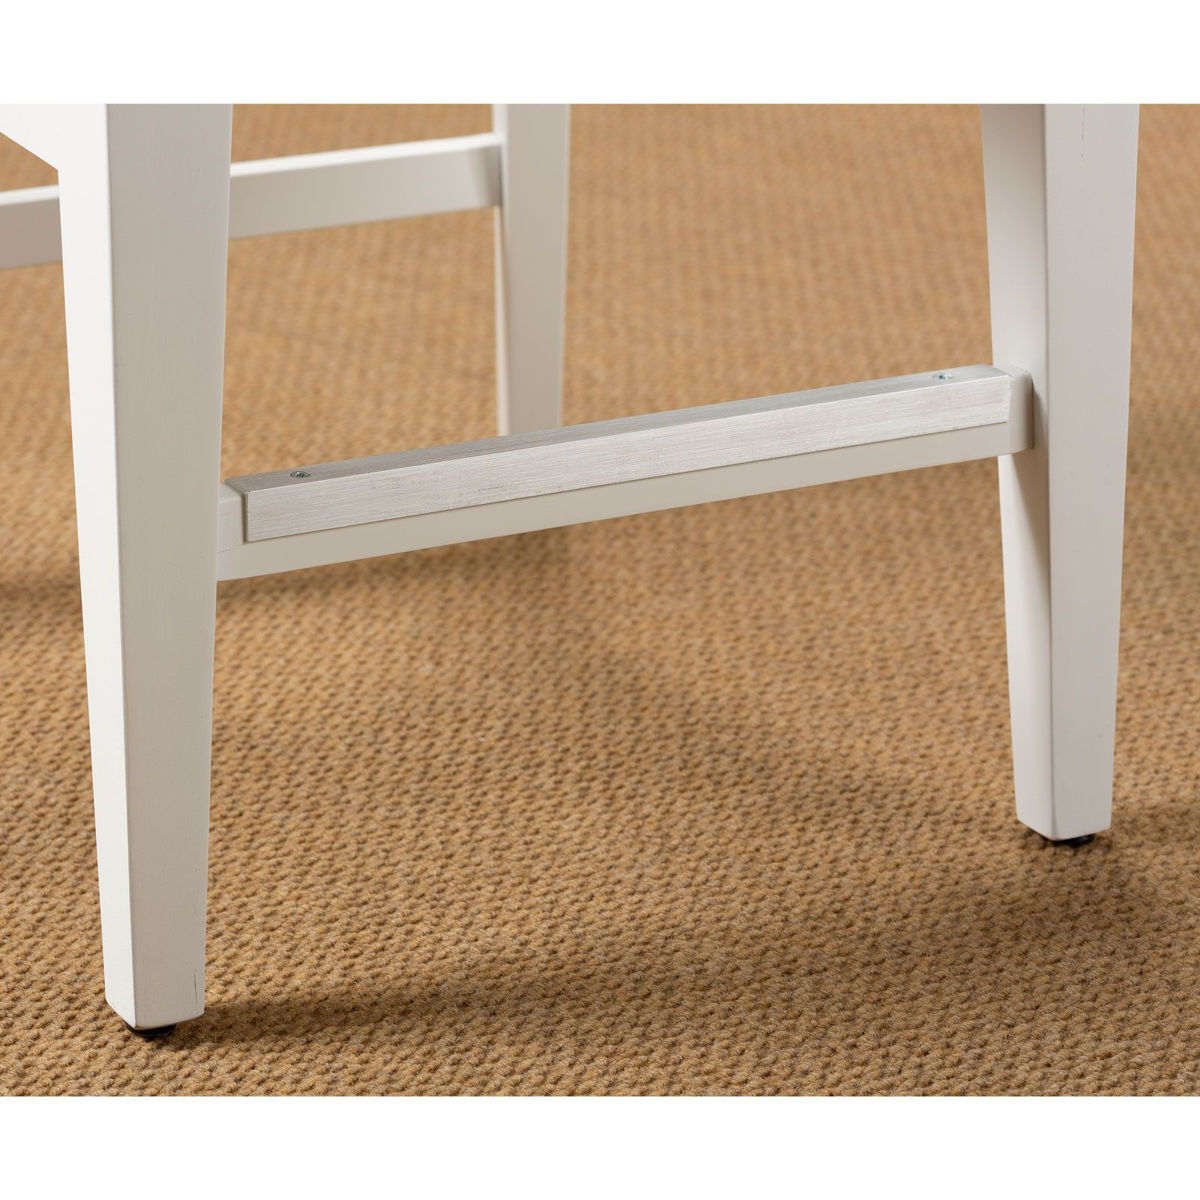 Picture of 24" Rake-Style Stool